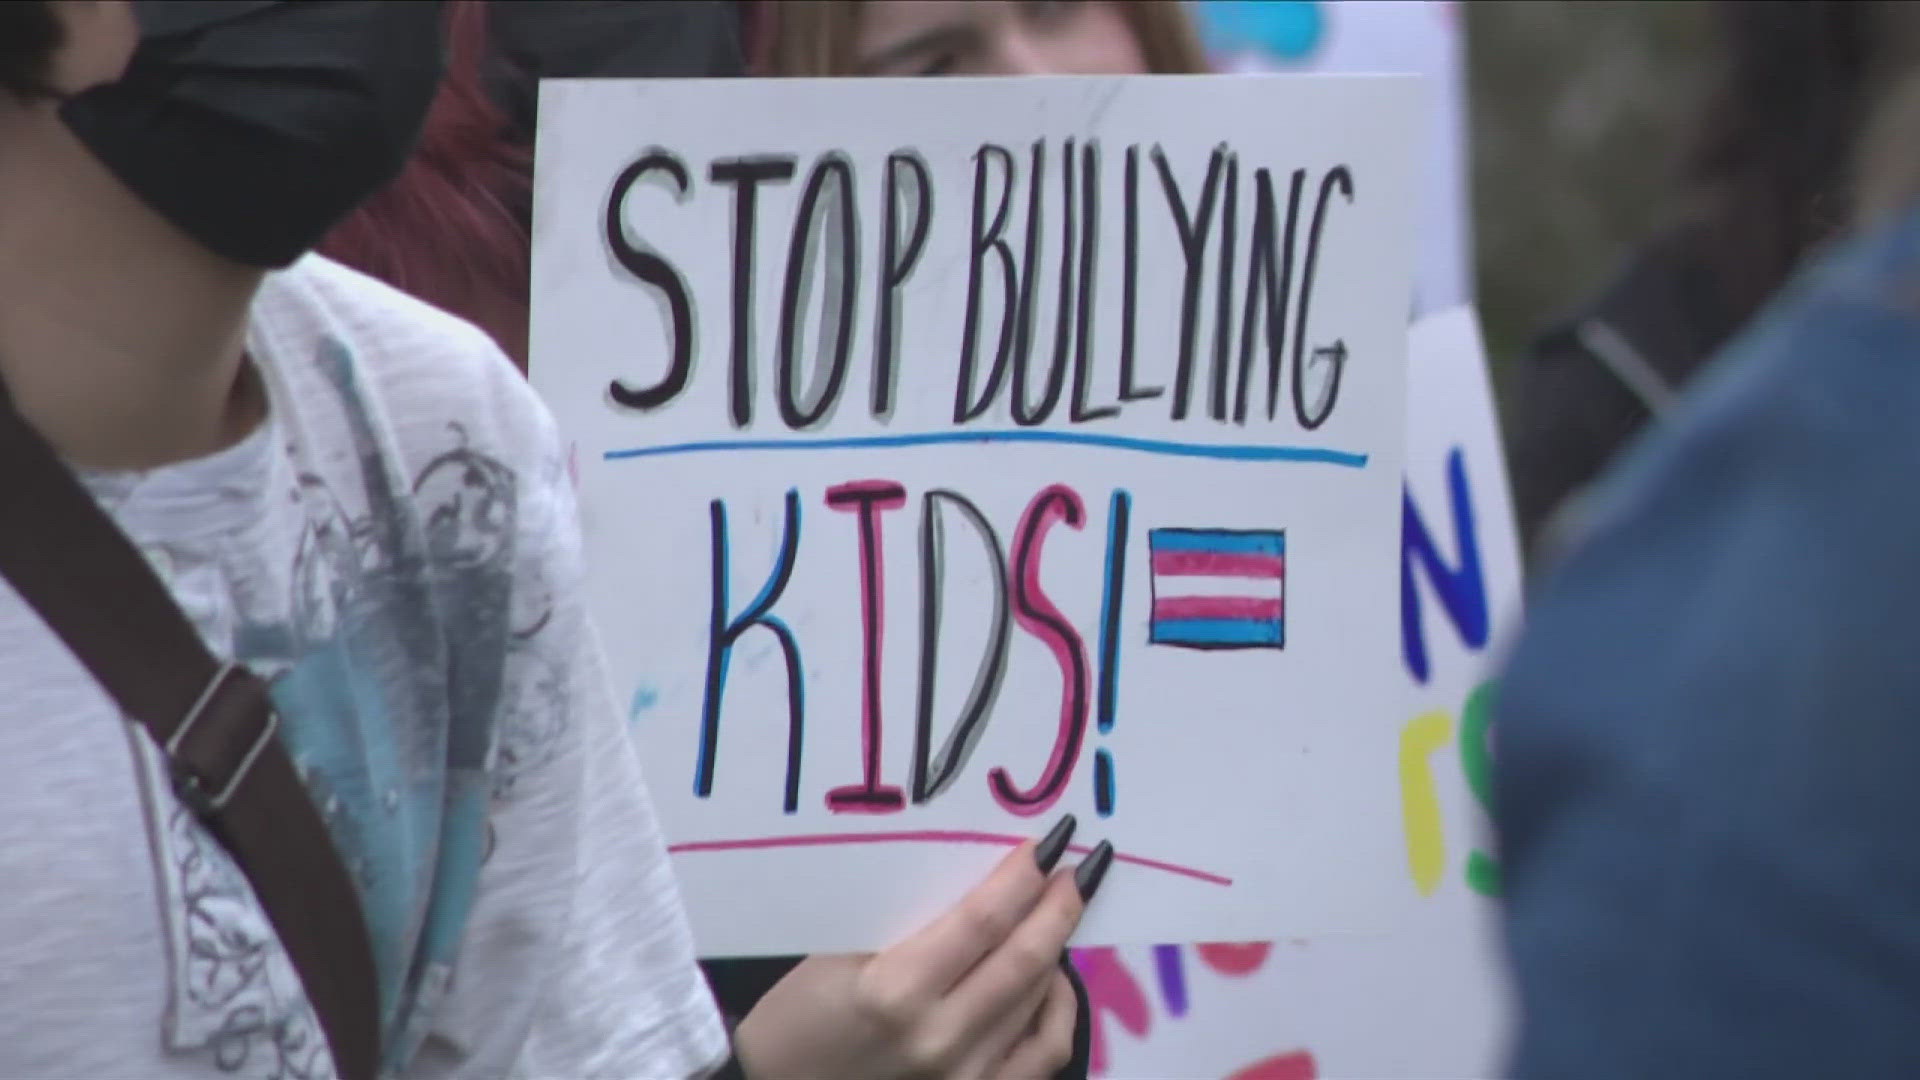 Tennessee’s GOP-controlled House has given their final approval on a bill criminalizing adults who help minors get gender-affirming care without parental consent.